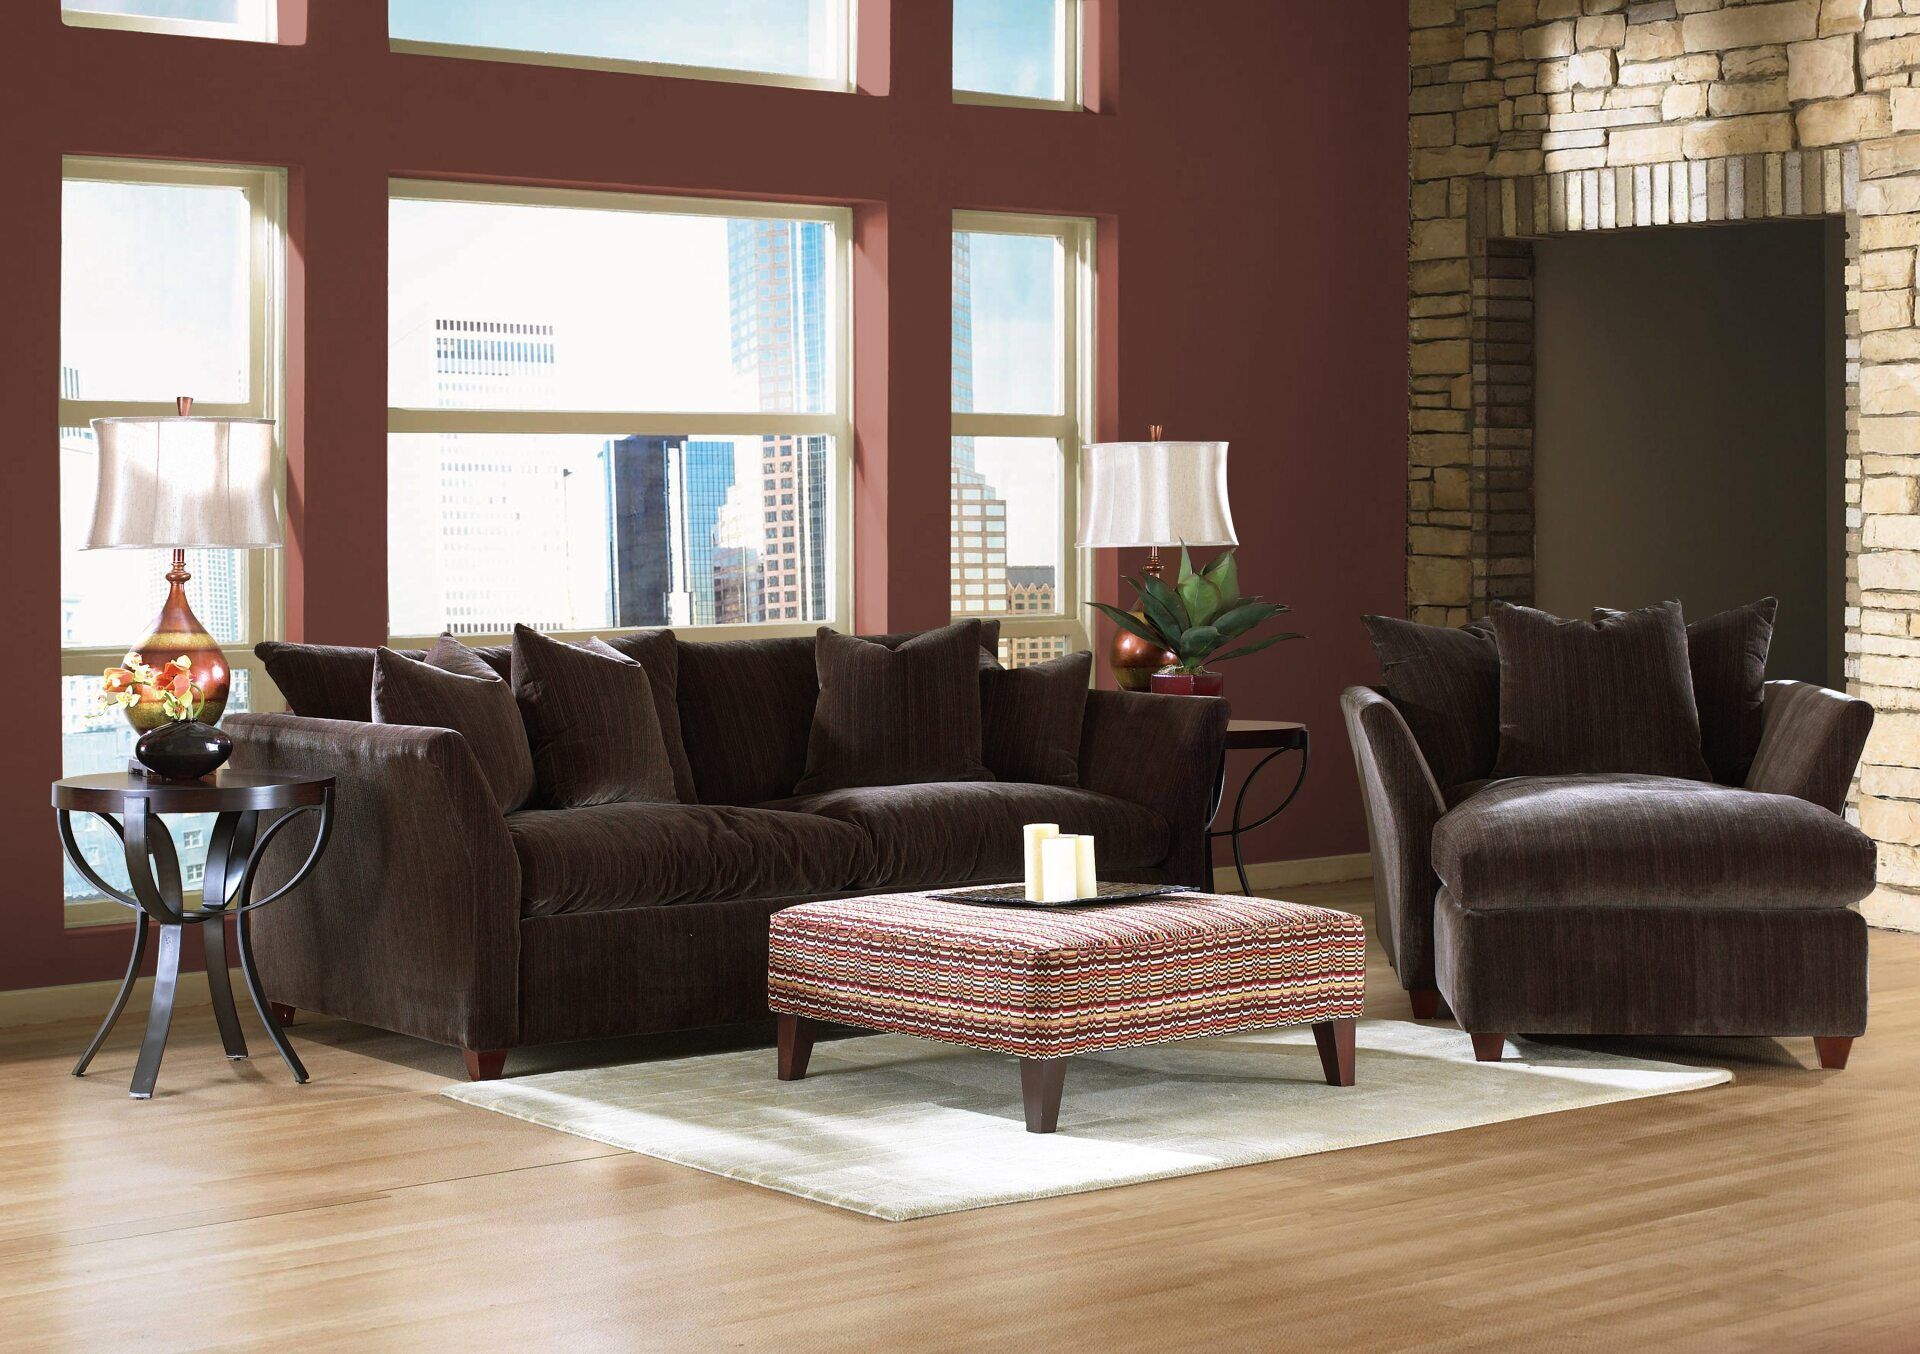 Living Room Furniture Selection near Richwood, KY